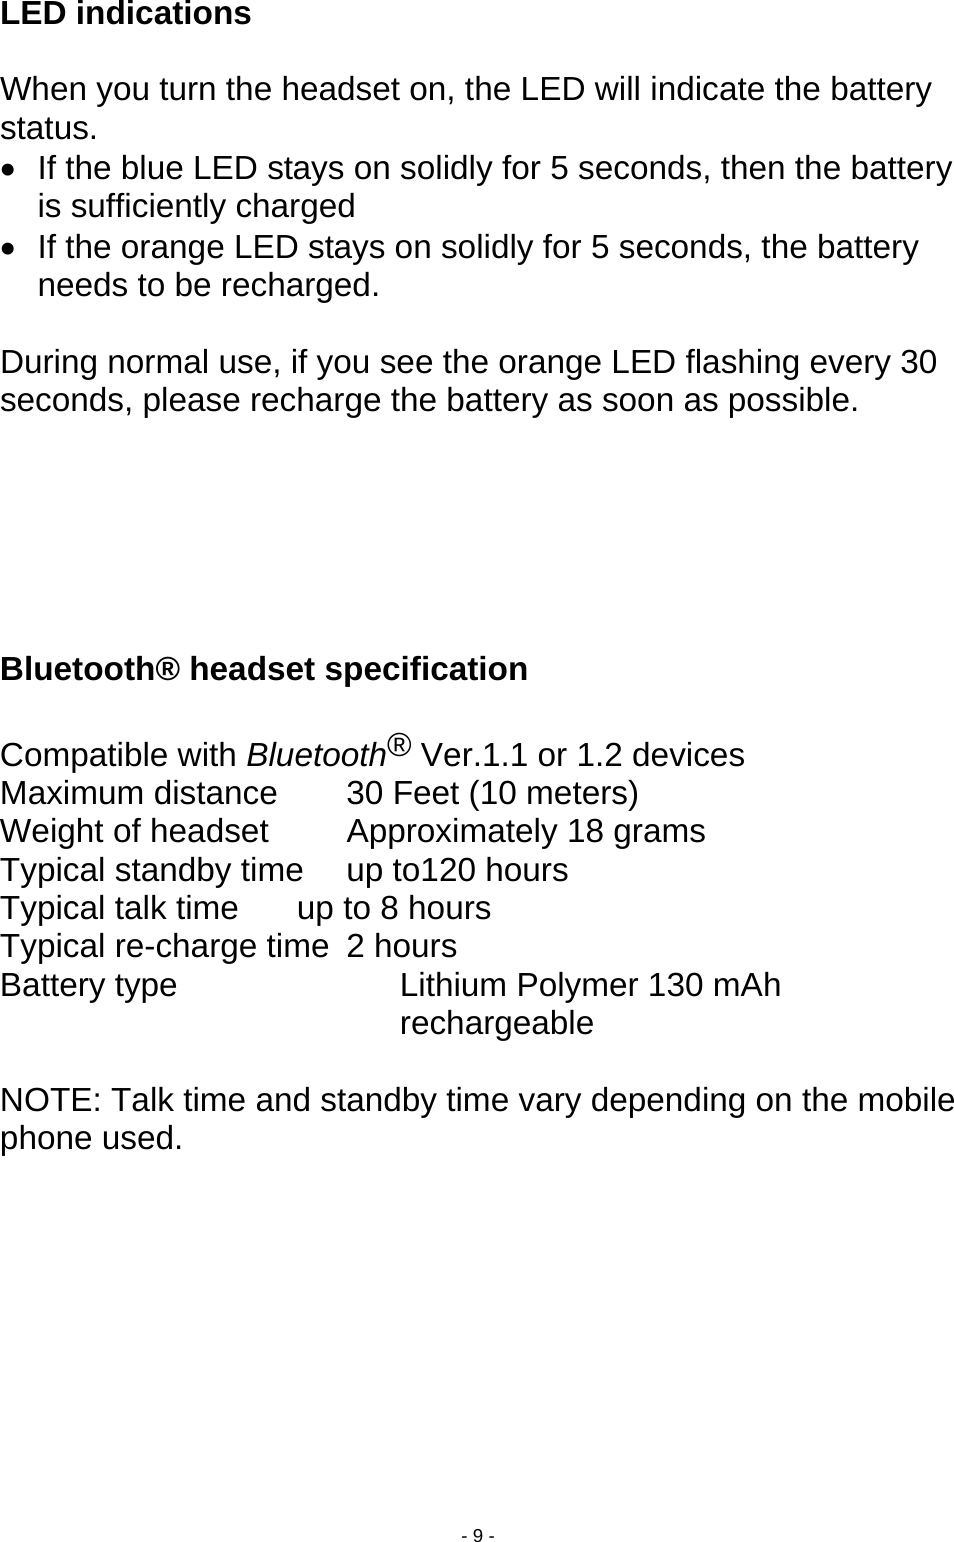  - 9 - LED indications    When you turn the headset on, the LED will indicate the battery status.  •  If the blue LED stays on solidly for 5 seconds, then the battery is sufficiently charged •  If the orange LED stays on solidly for 5 seconds, the battery needs to be recharged.  During normal use, if you see the orange LED flashing every 30 seconds, please recharge the battery as soon as possible.       Bluetooth® headset specification    Compatible with Bluetooth® Ver.1.1 or 1.2 devices Maximum distance    30 Feet (10 meters) Weight of headset    Approximately 18 grams Typical standby time  up to120 hours Typical talk time   up to 8 hours Typical re-charge time  2 hours   Battery type  Lithium Polymer 130 mAh rechargeable  NOTE: Talk time and standby time vary depending on the mobile phone used. 